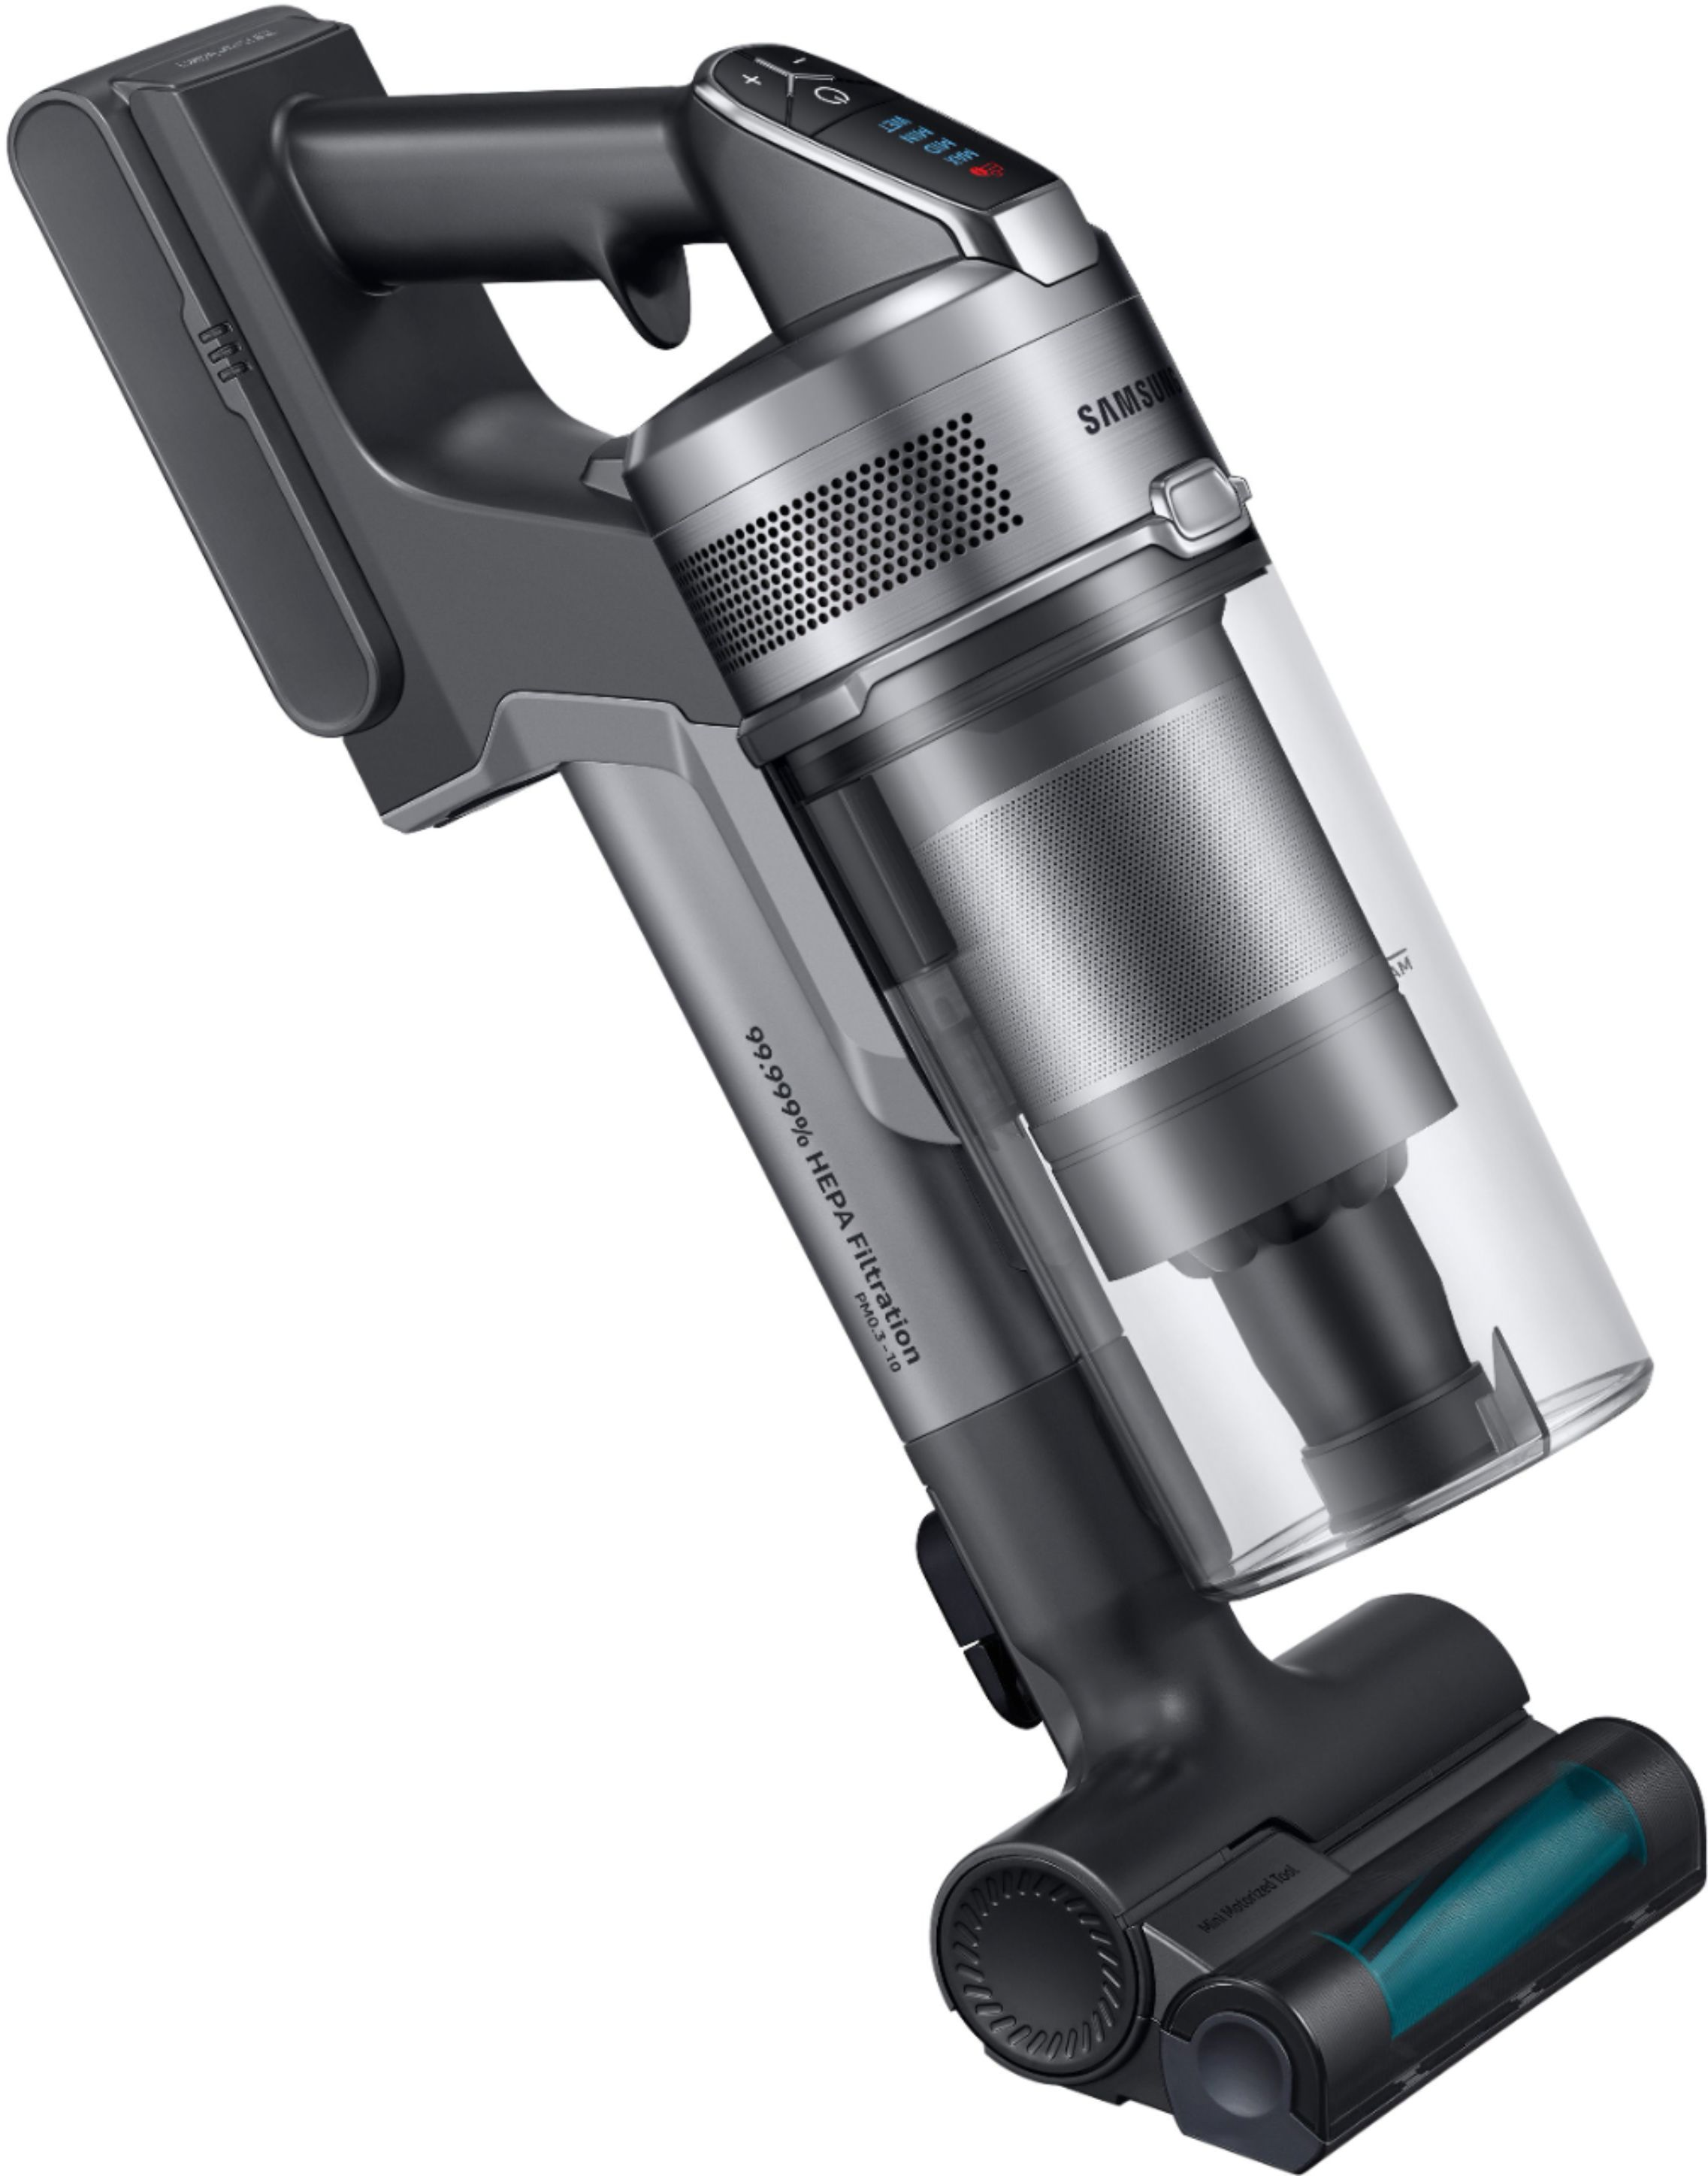 Best Buy: Samsung Jet™ 75 Complete Cordless Stick Vacuum with Long-Lasting  Battery ChroMetal with Teal Silver Filter VS20T7536T5/AA